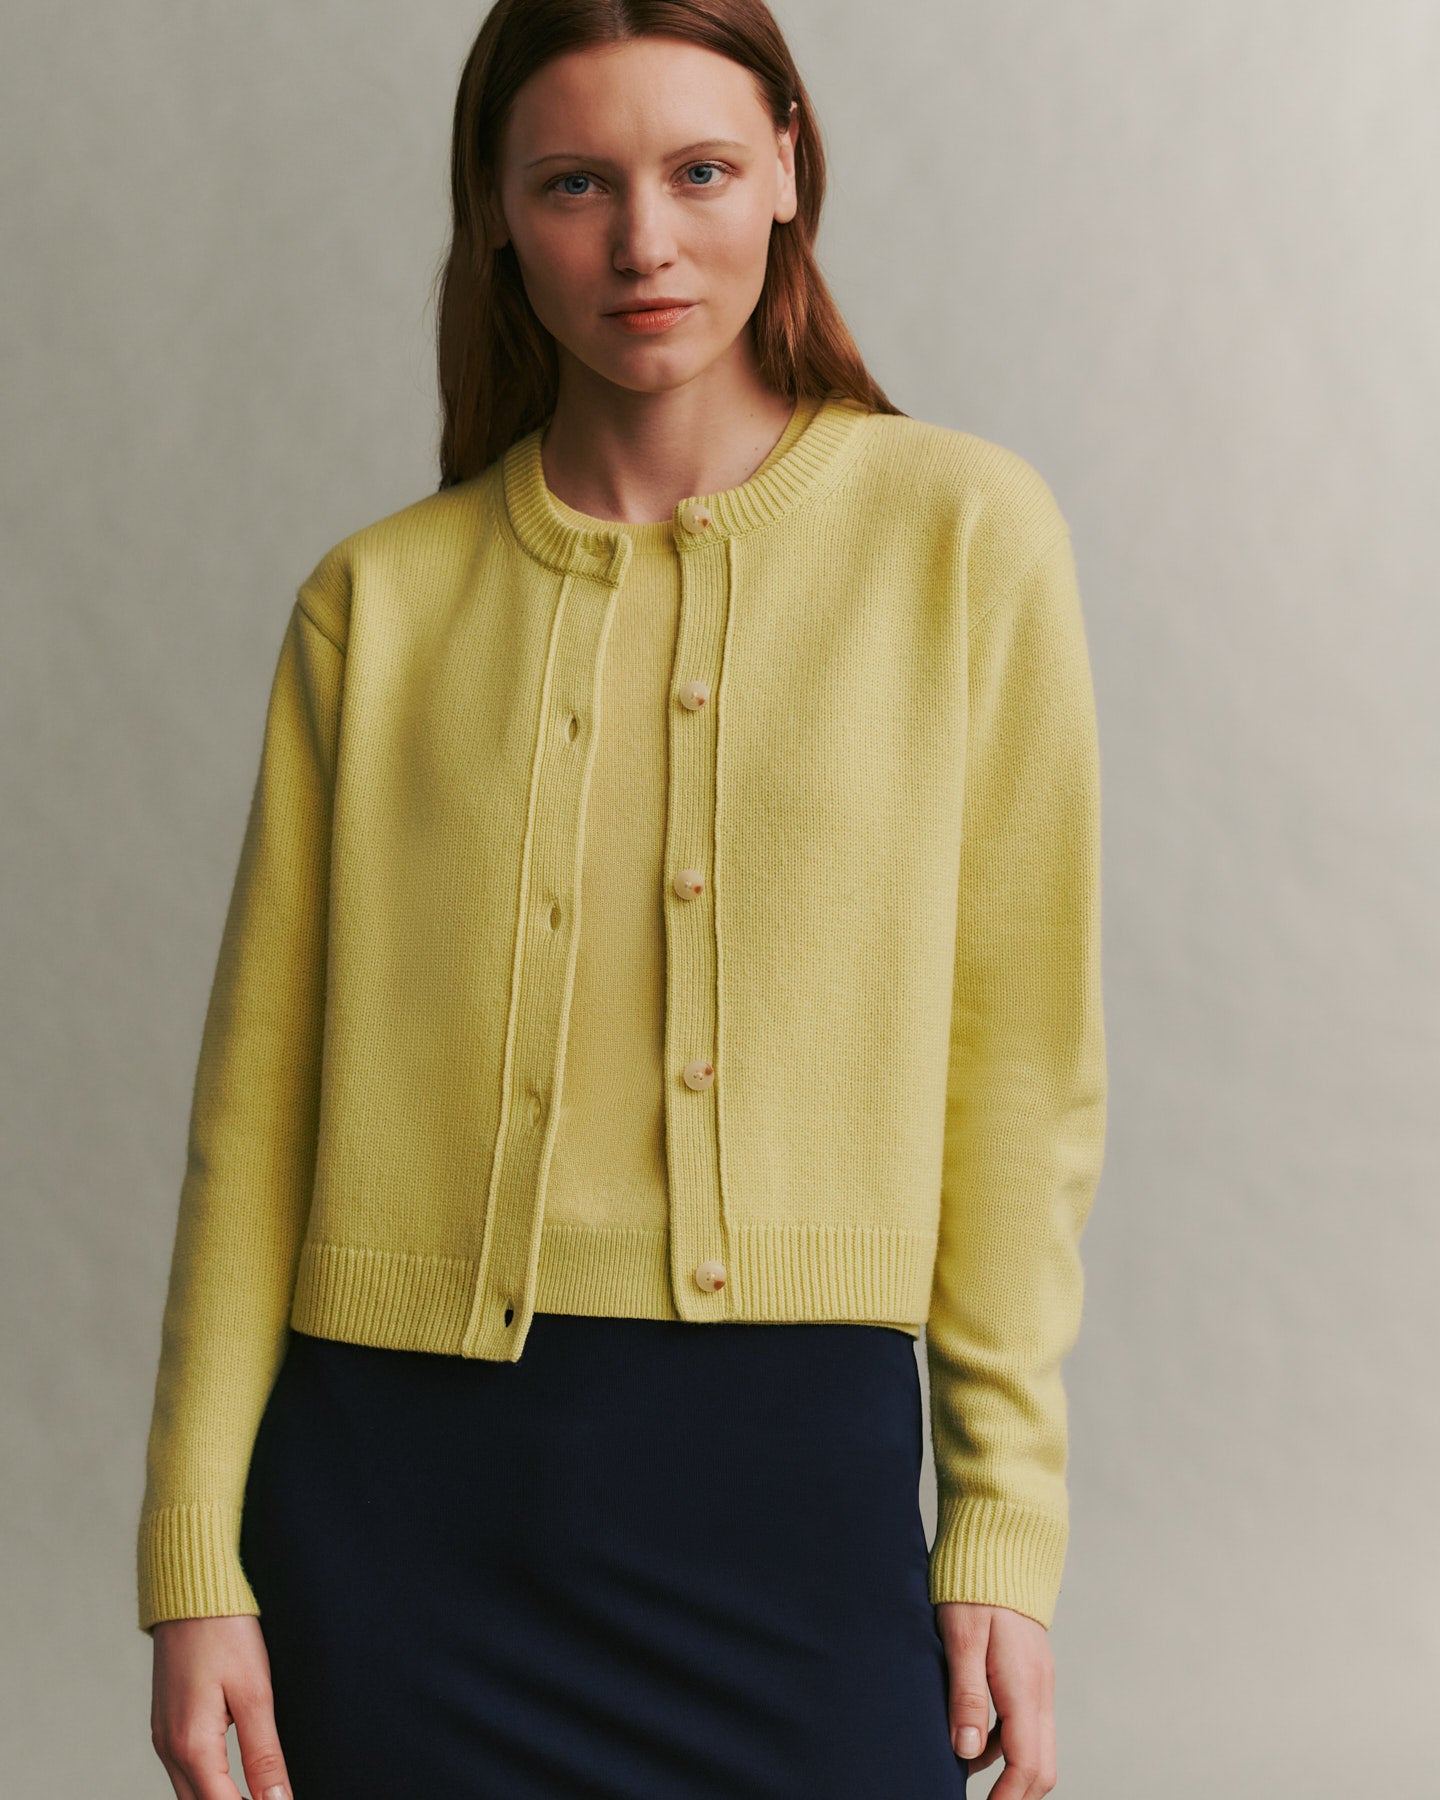 TWP Canary Lord Cardigan in Cashmere view 4